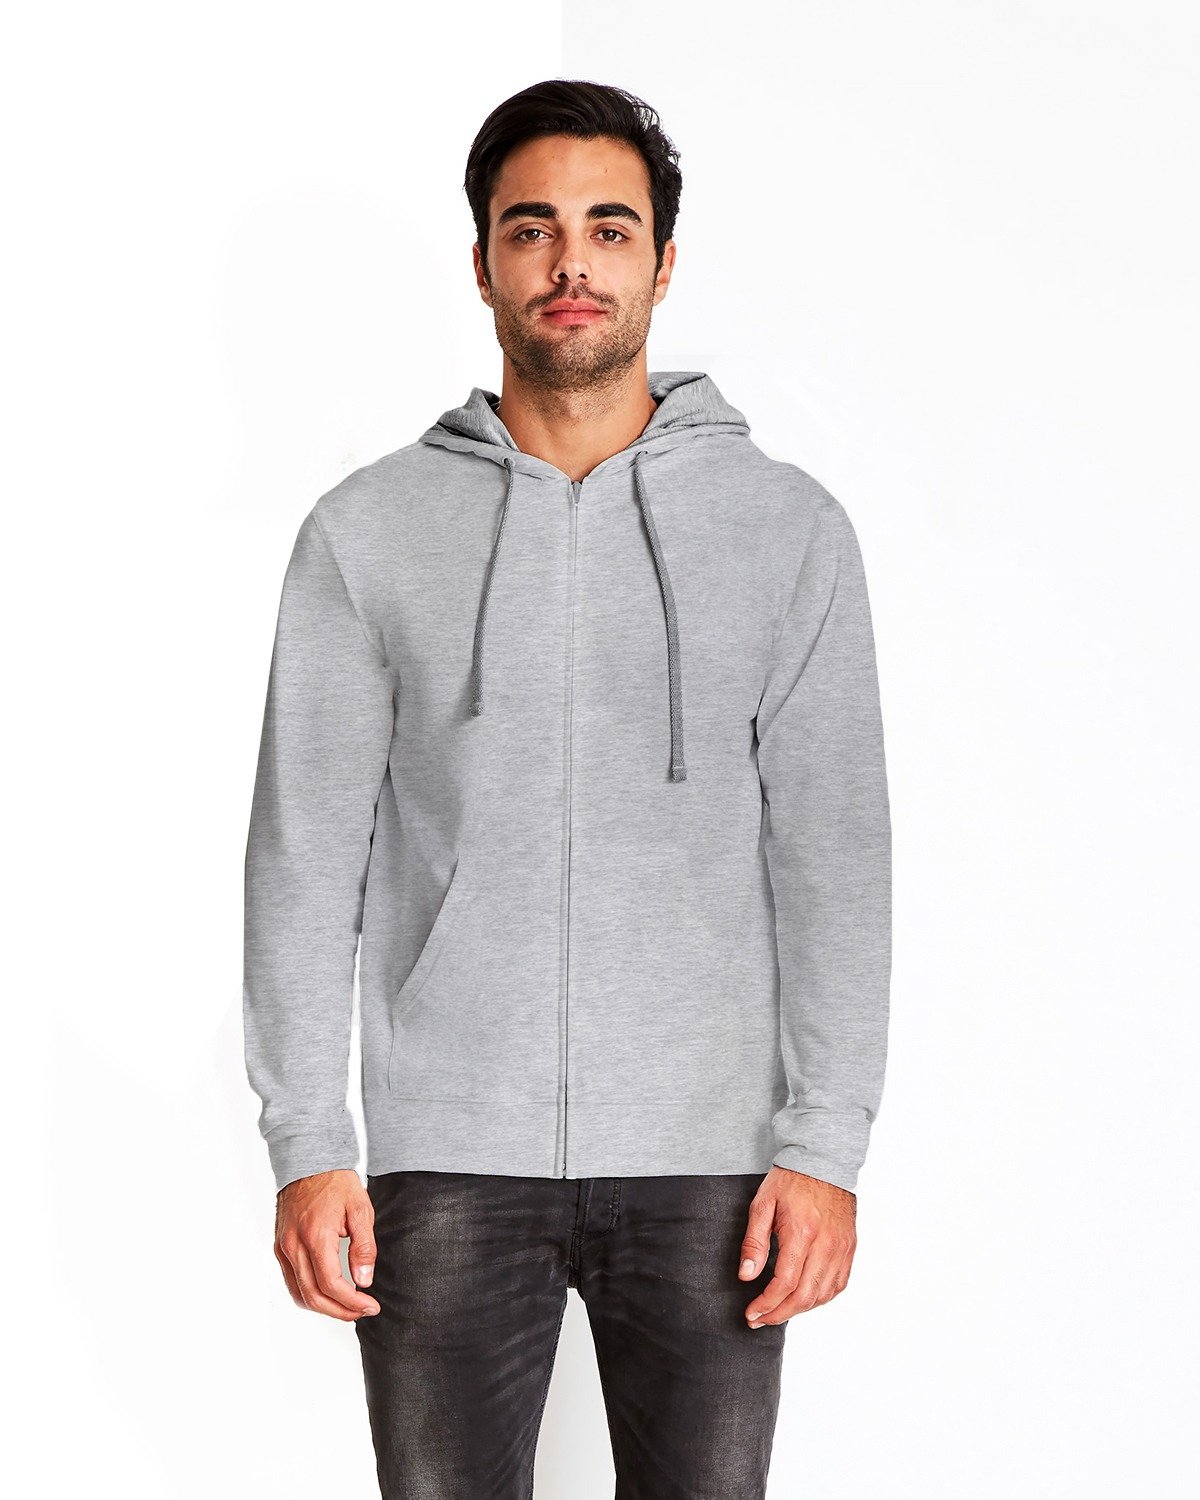 Next Level Adult Laguna French Terry Full-Zip Hooded Sweatshirt HTH GRY/ HTH GRY 